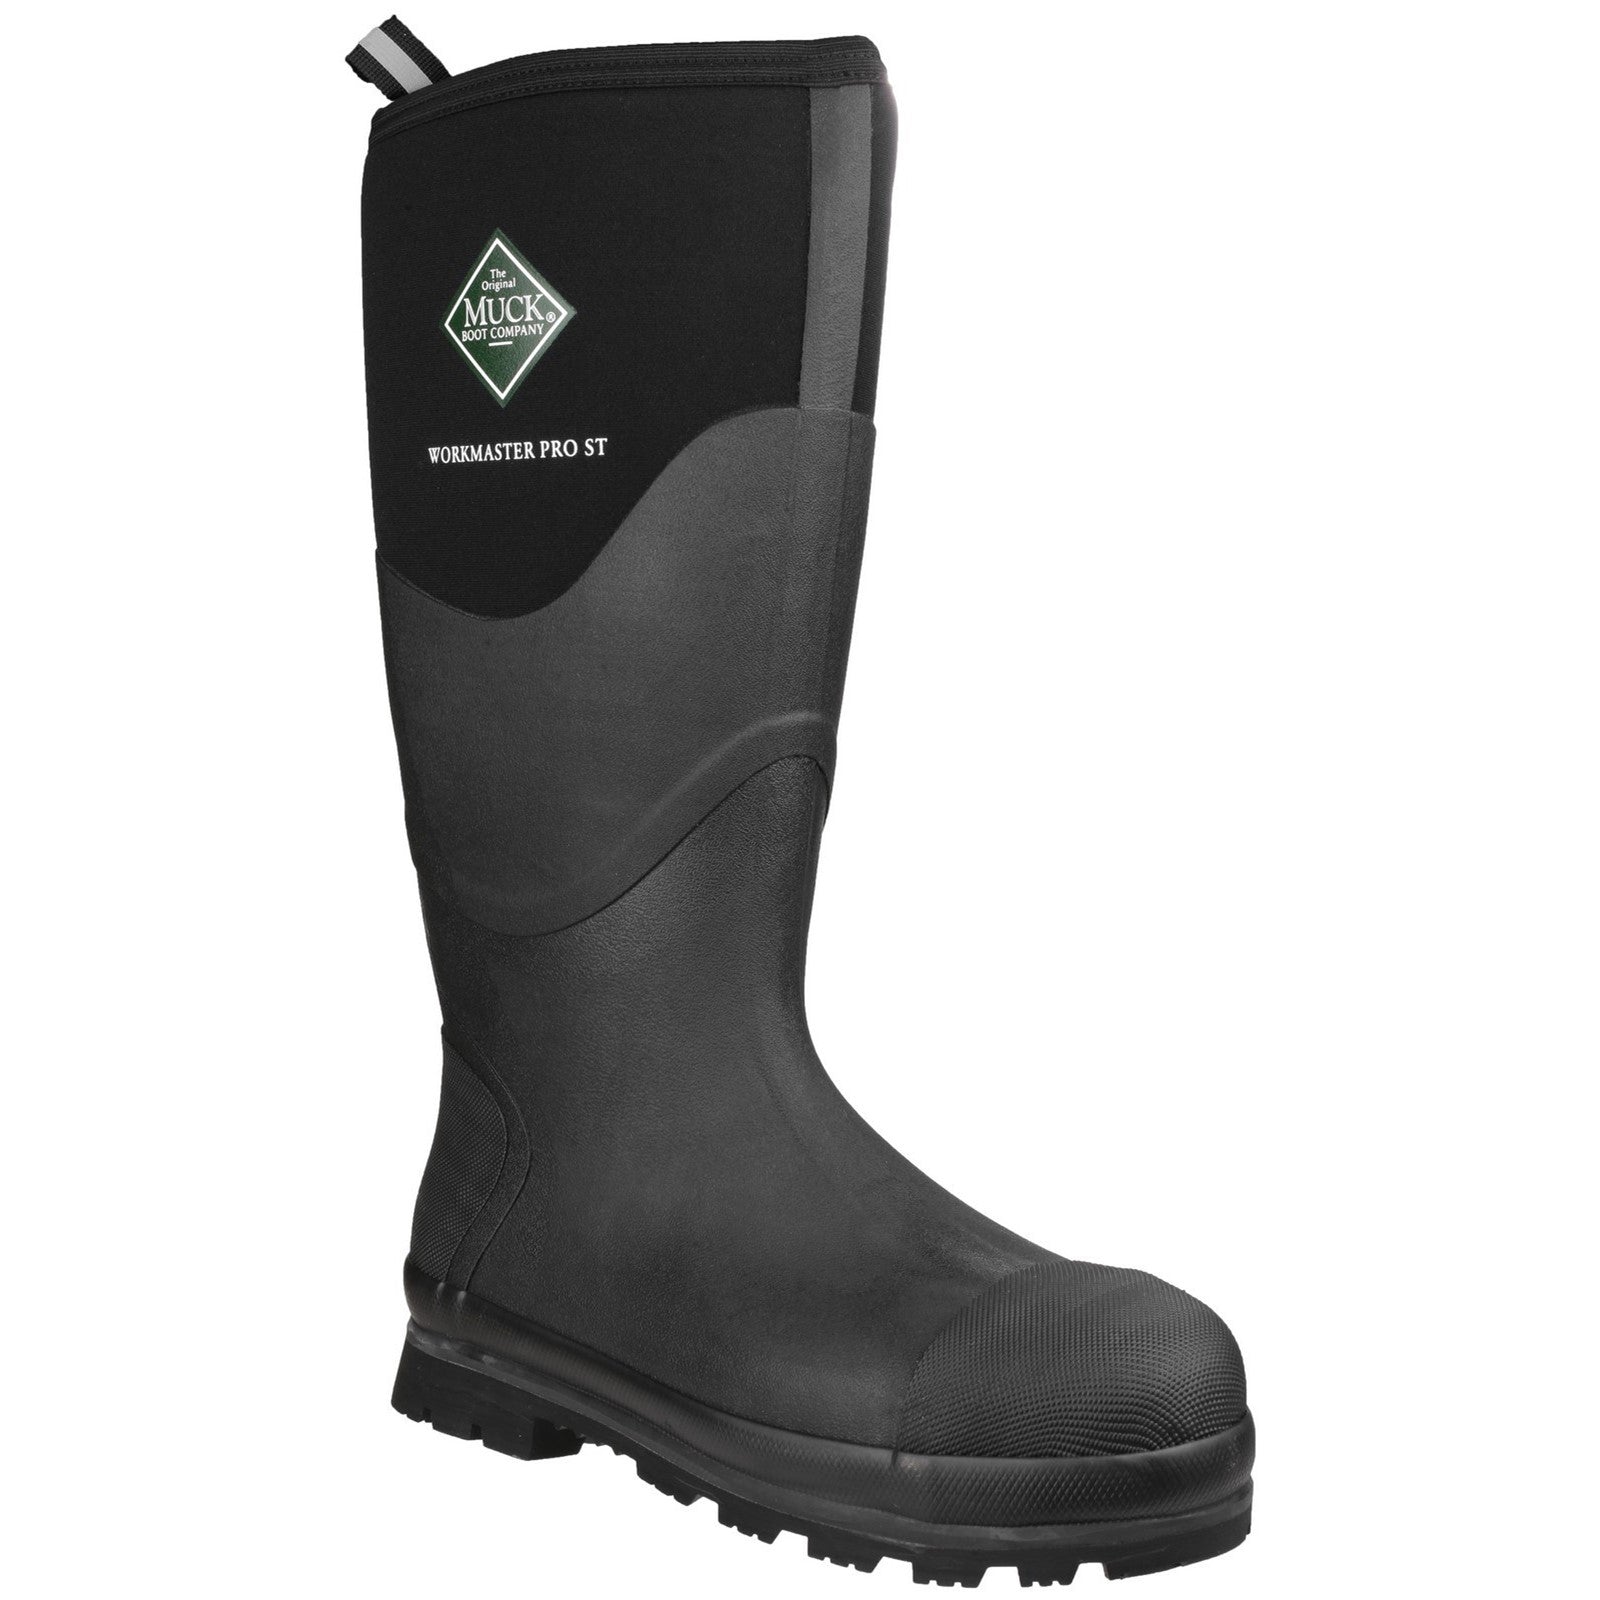 Muck Boots Workmaster Pro High Waterproof Safety Wellington